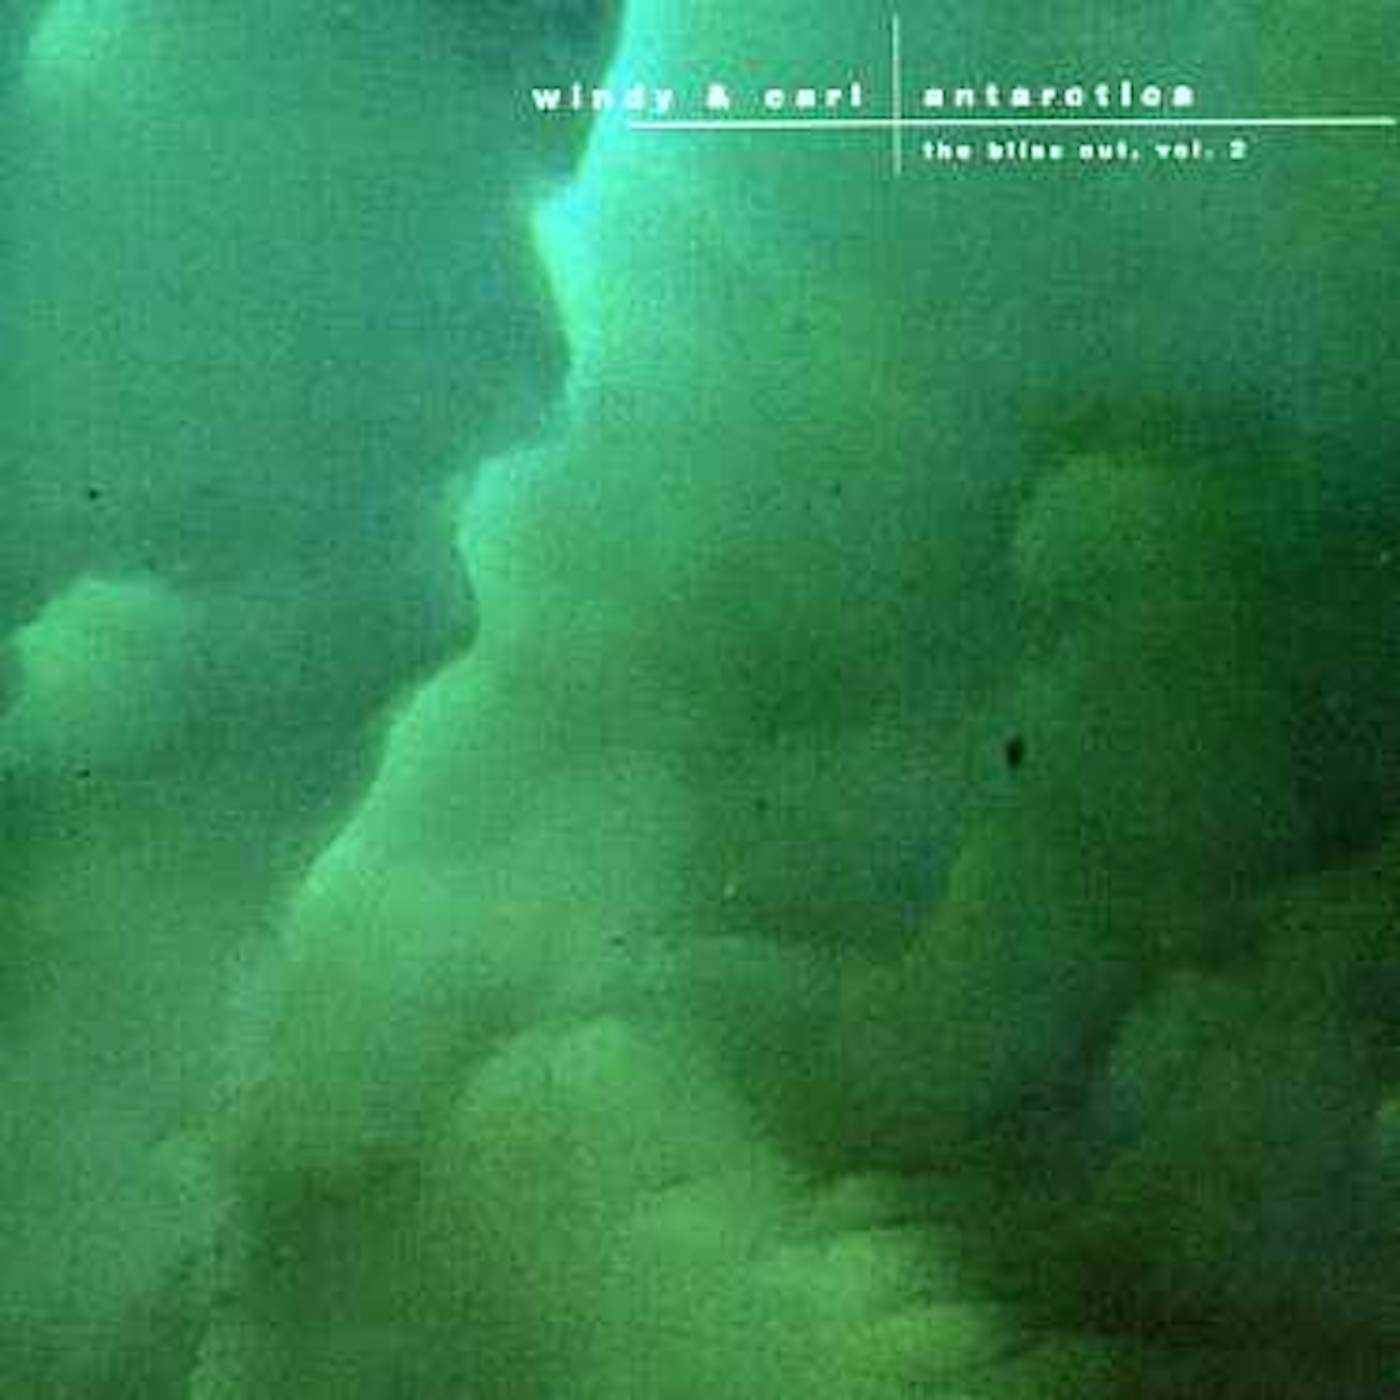 Windy & Carl ANTARTICA: BLISS OUT 2 CD